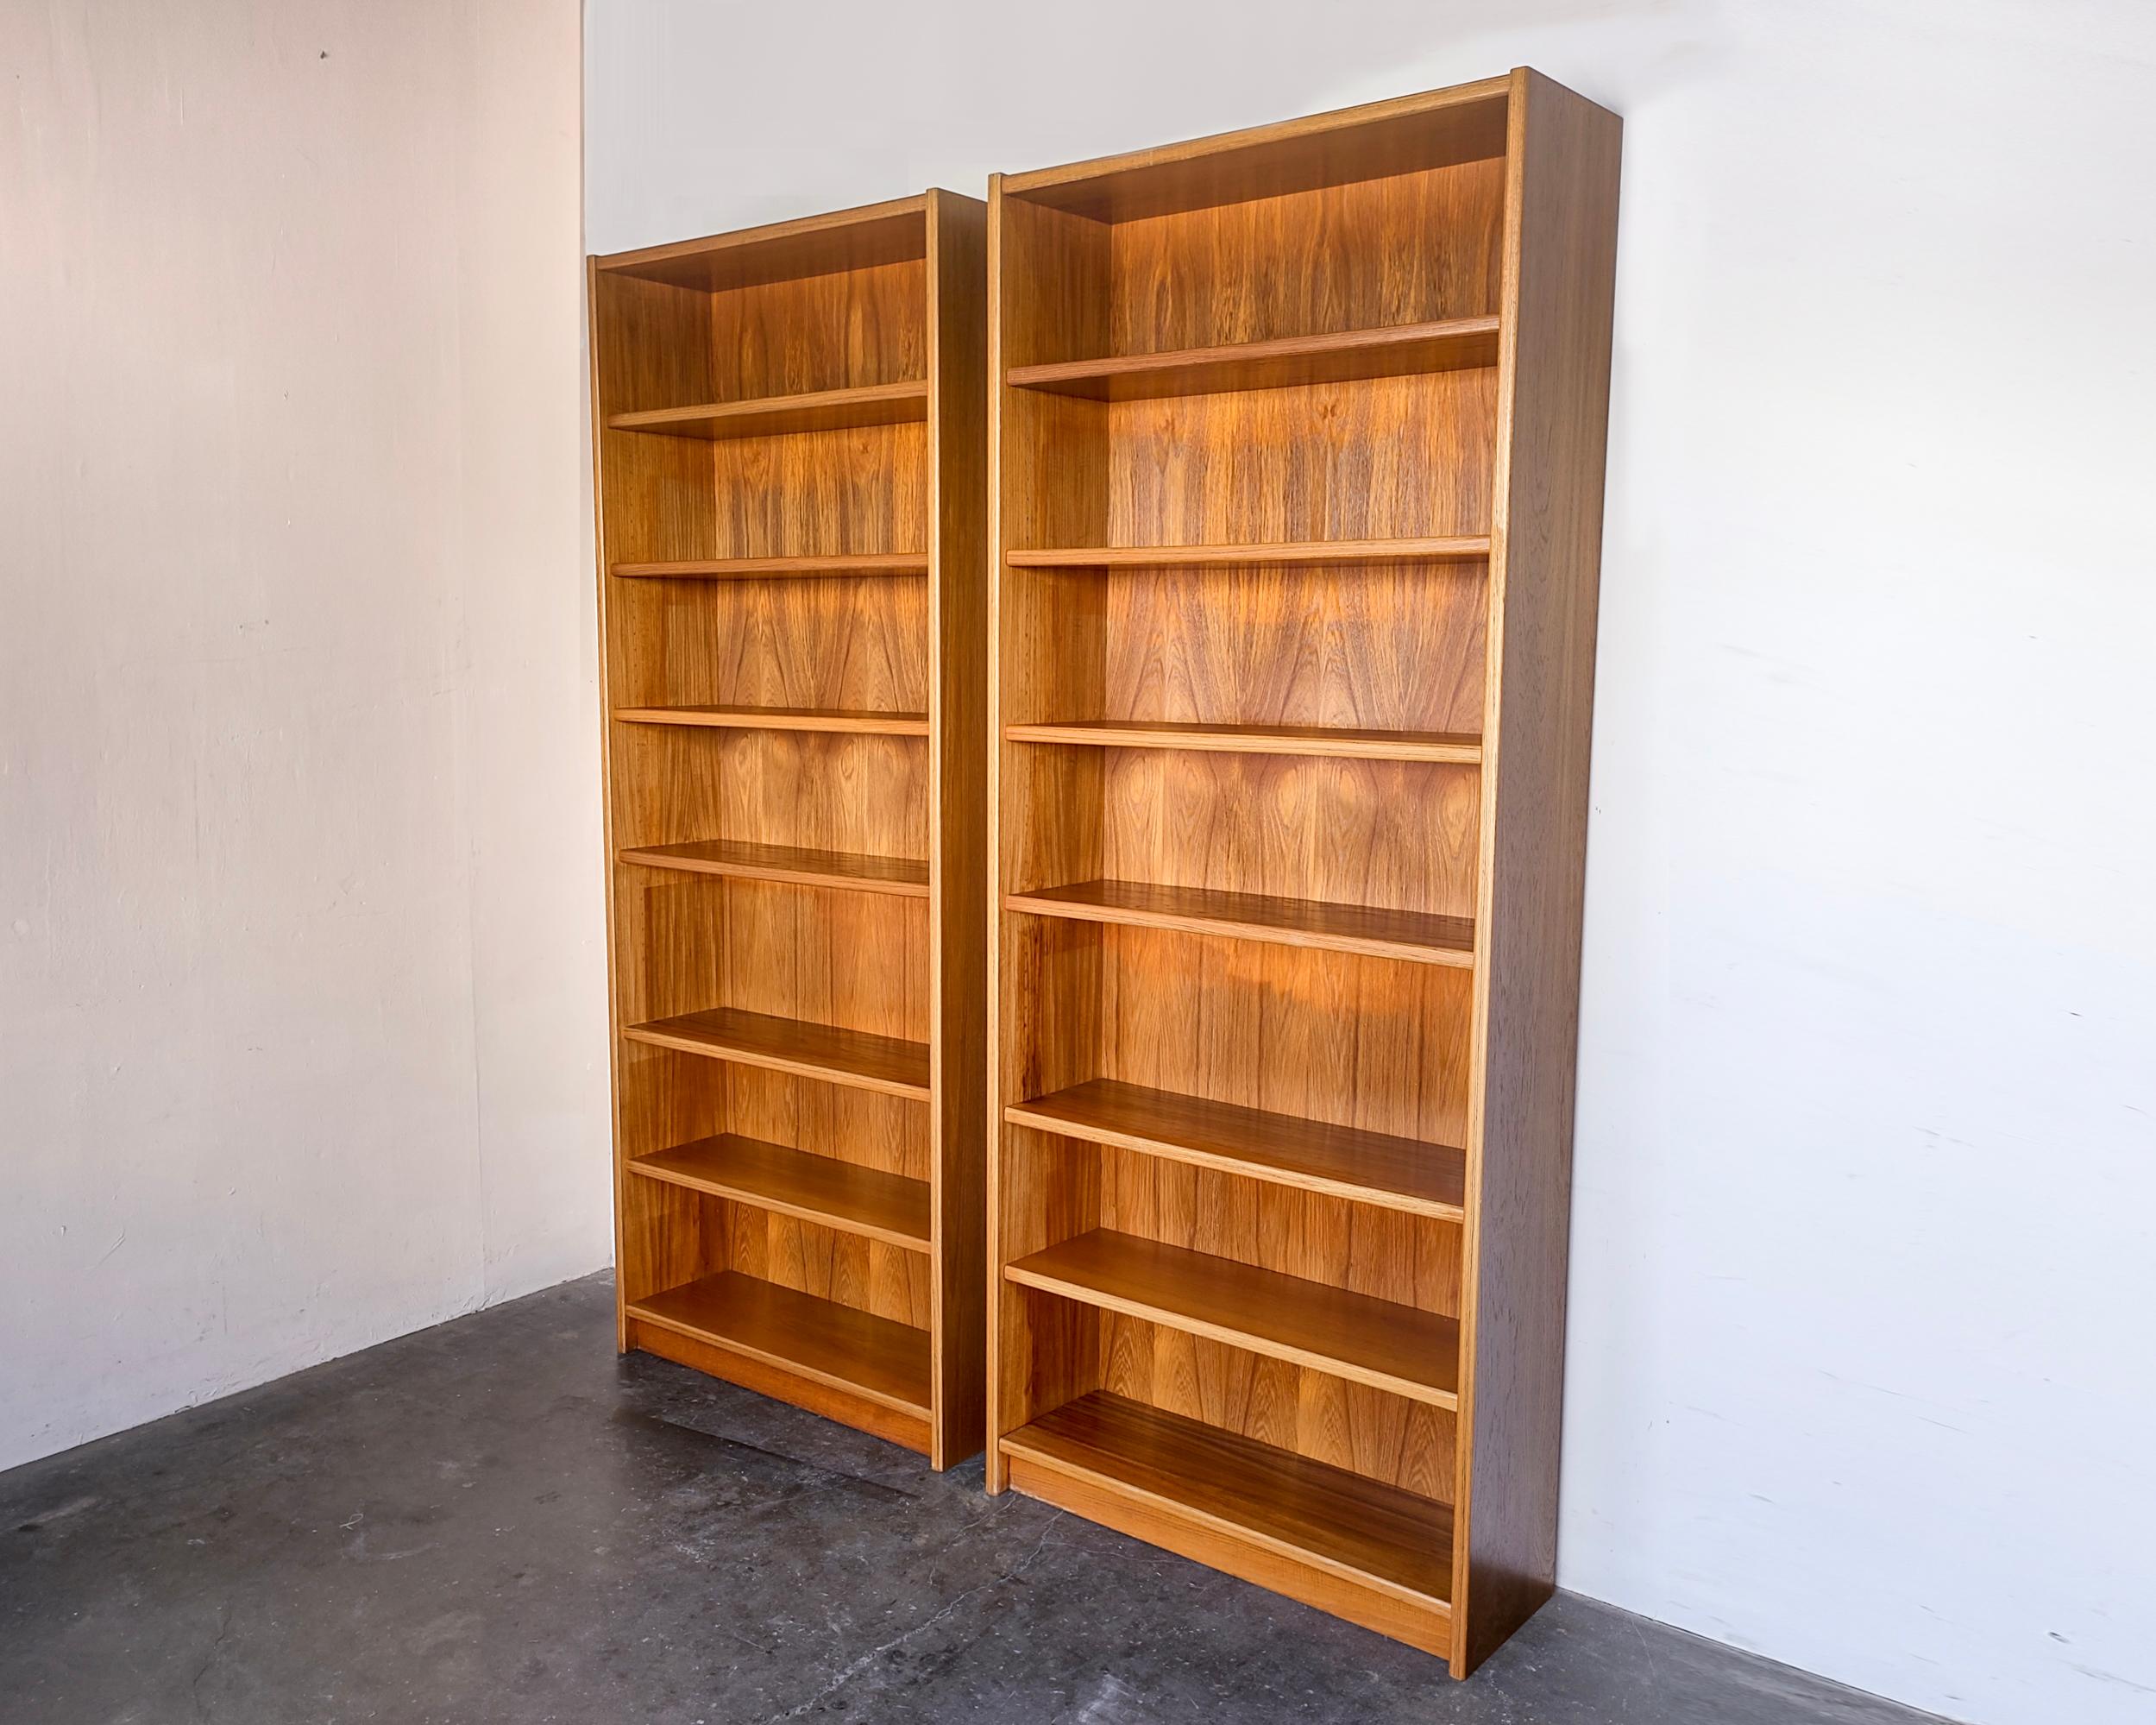 Set of two Danish modern teak bookshelves with six shelves on each. Adjustable shelves except one fixed in the center. Sun fading on interior surfaces and shelves, which would be made more apparent if the shelves are moved in different positions.